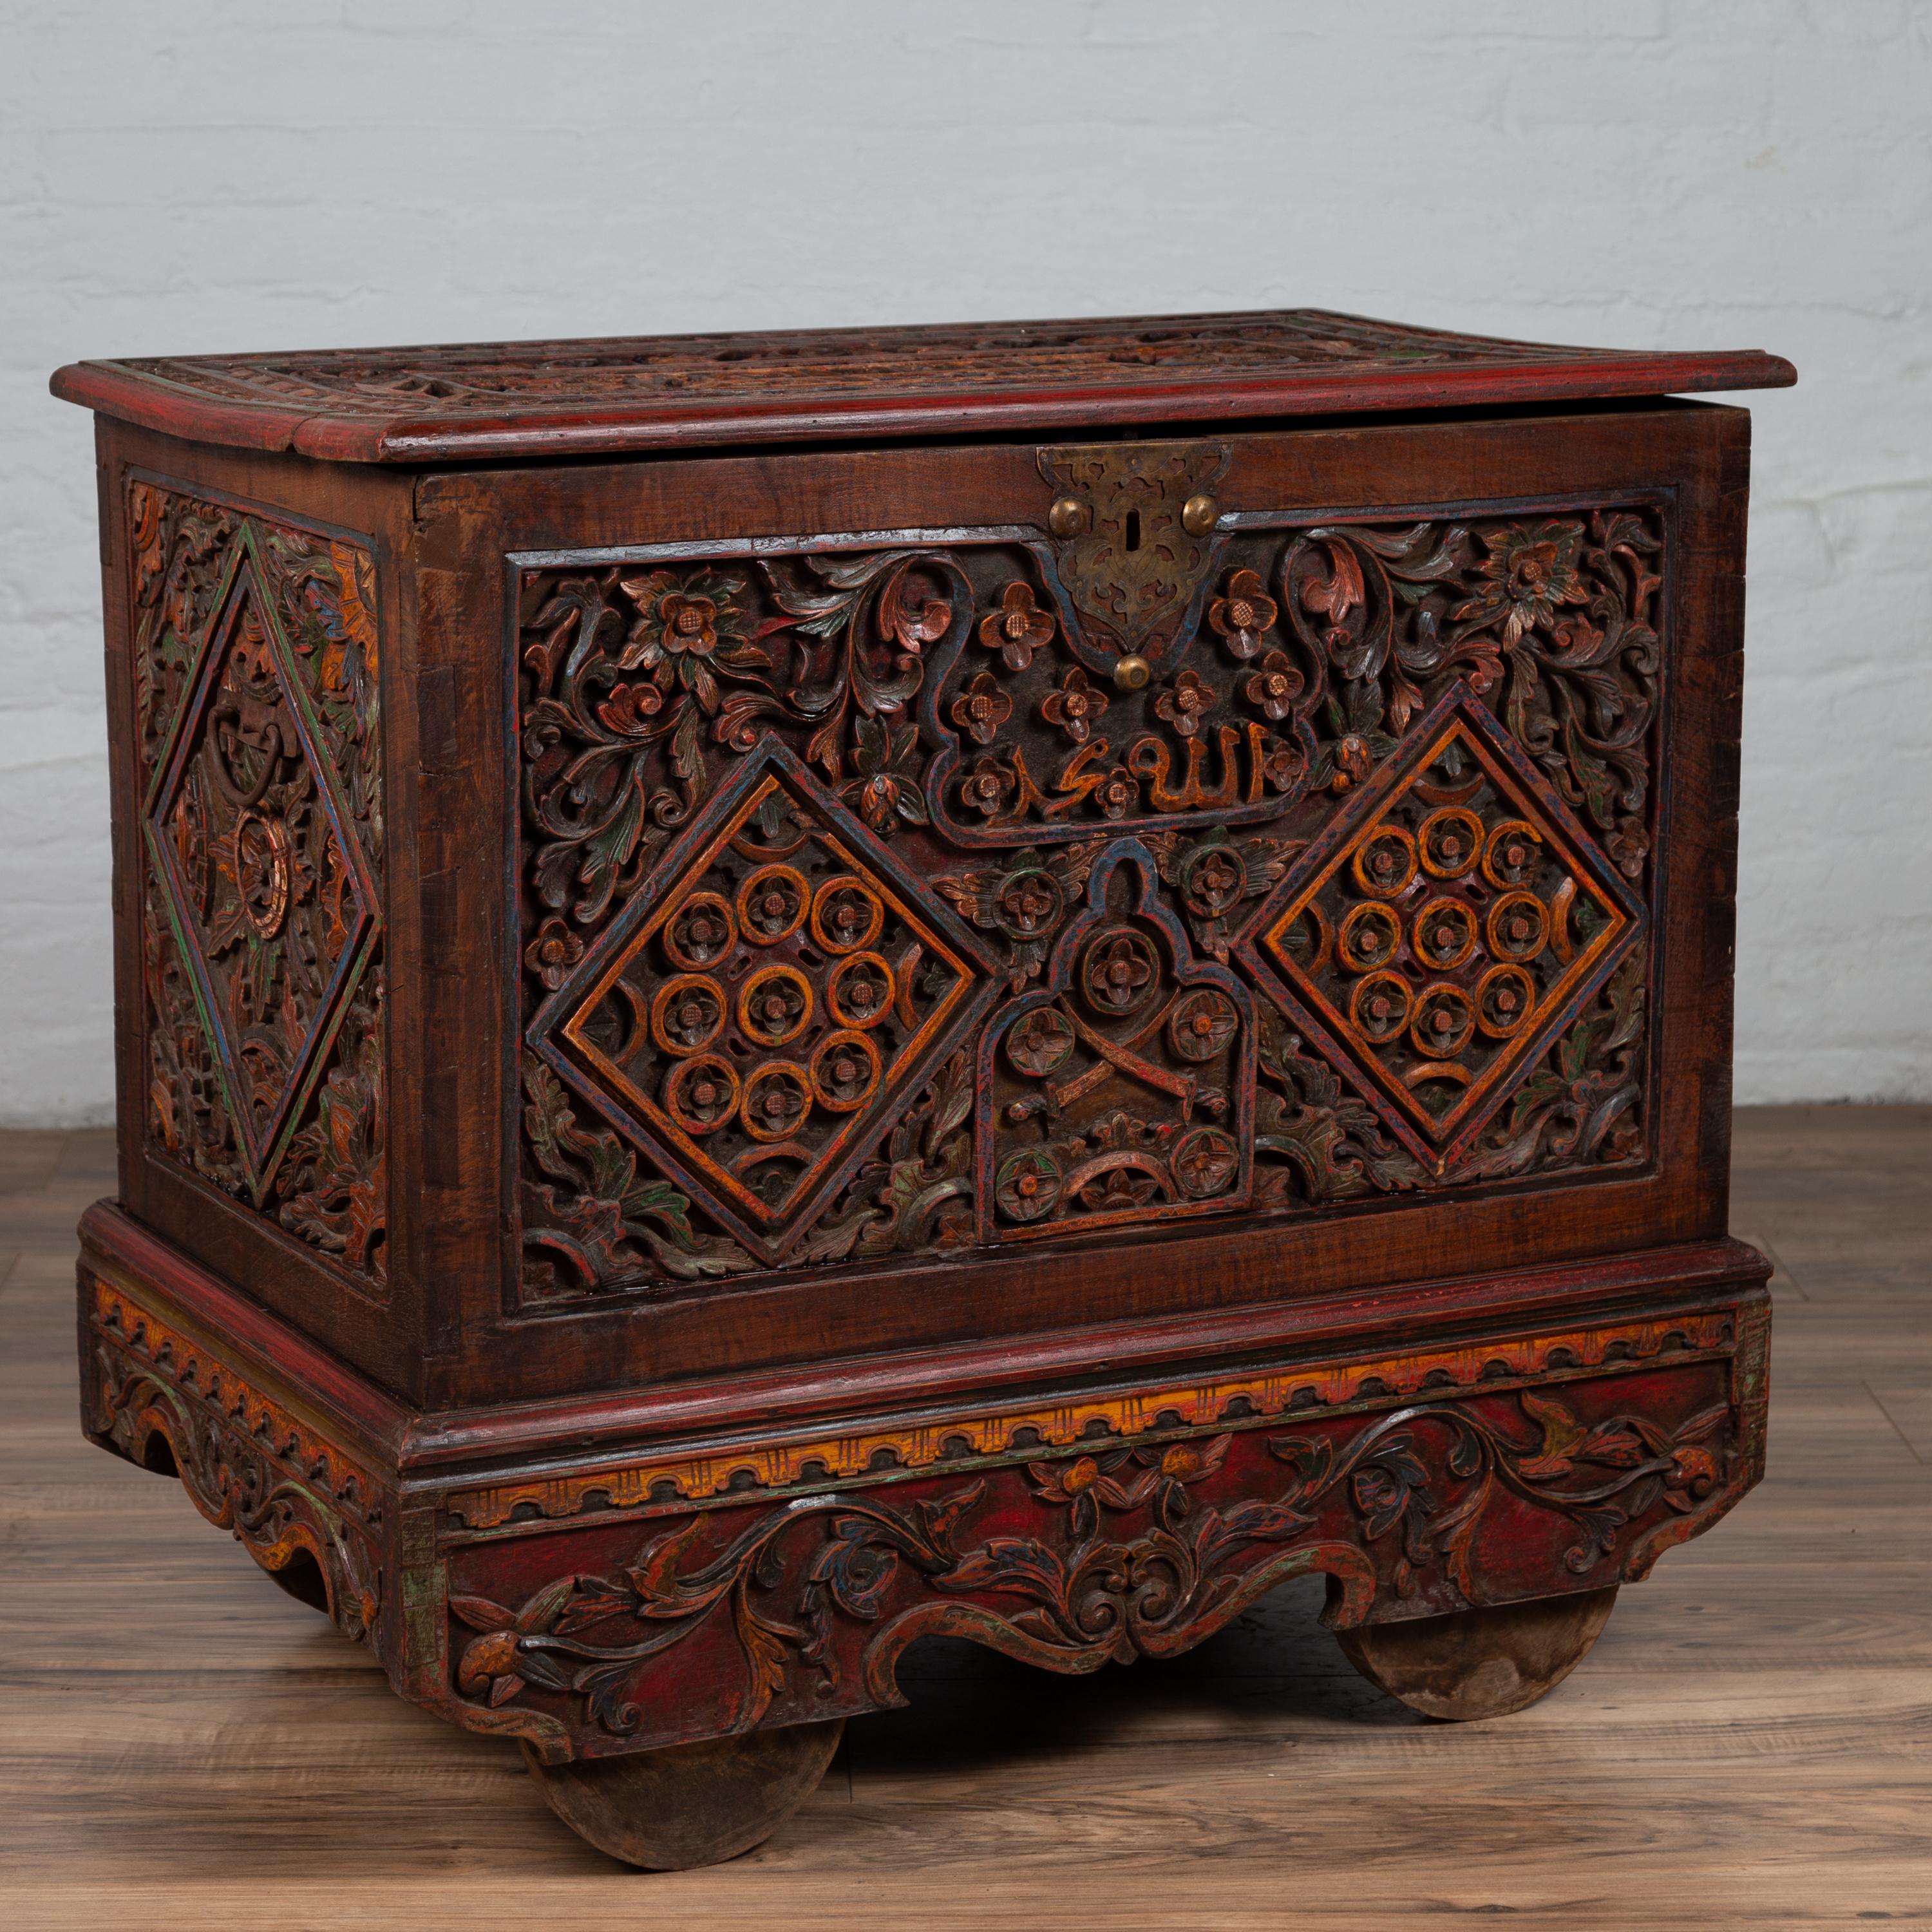 An antique Indonesian hand carved blanket chest from the early 20th century, with intricate floral motifs, underglaze patina and wheels. Born in Indonesia during the early years of the 20th century, this exquisite blanket chest captures our